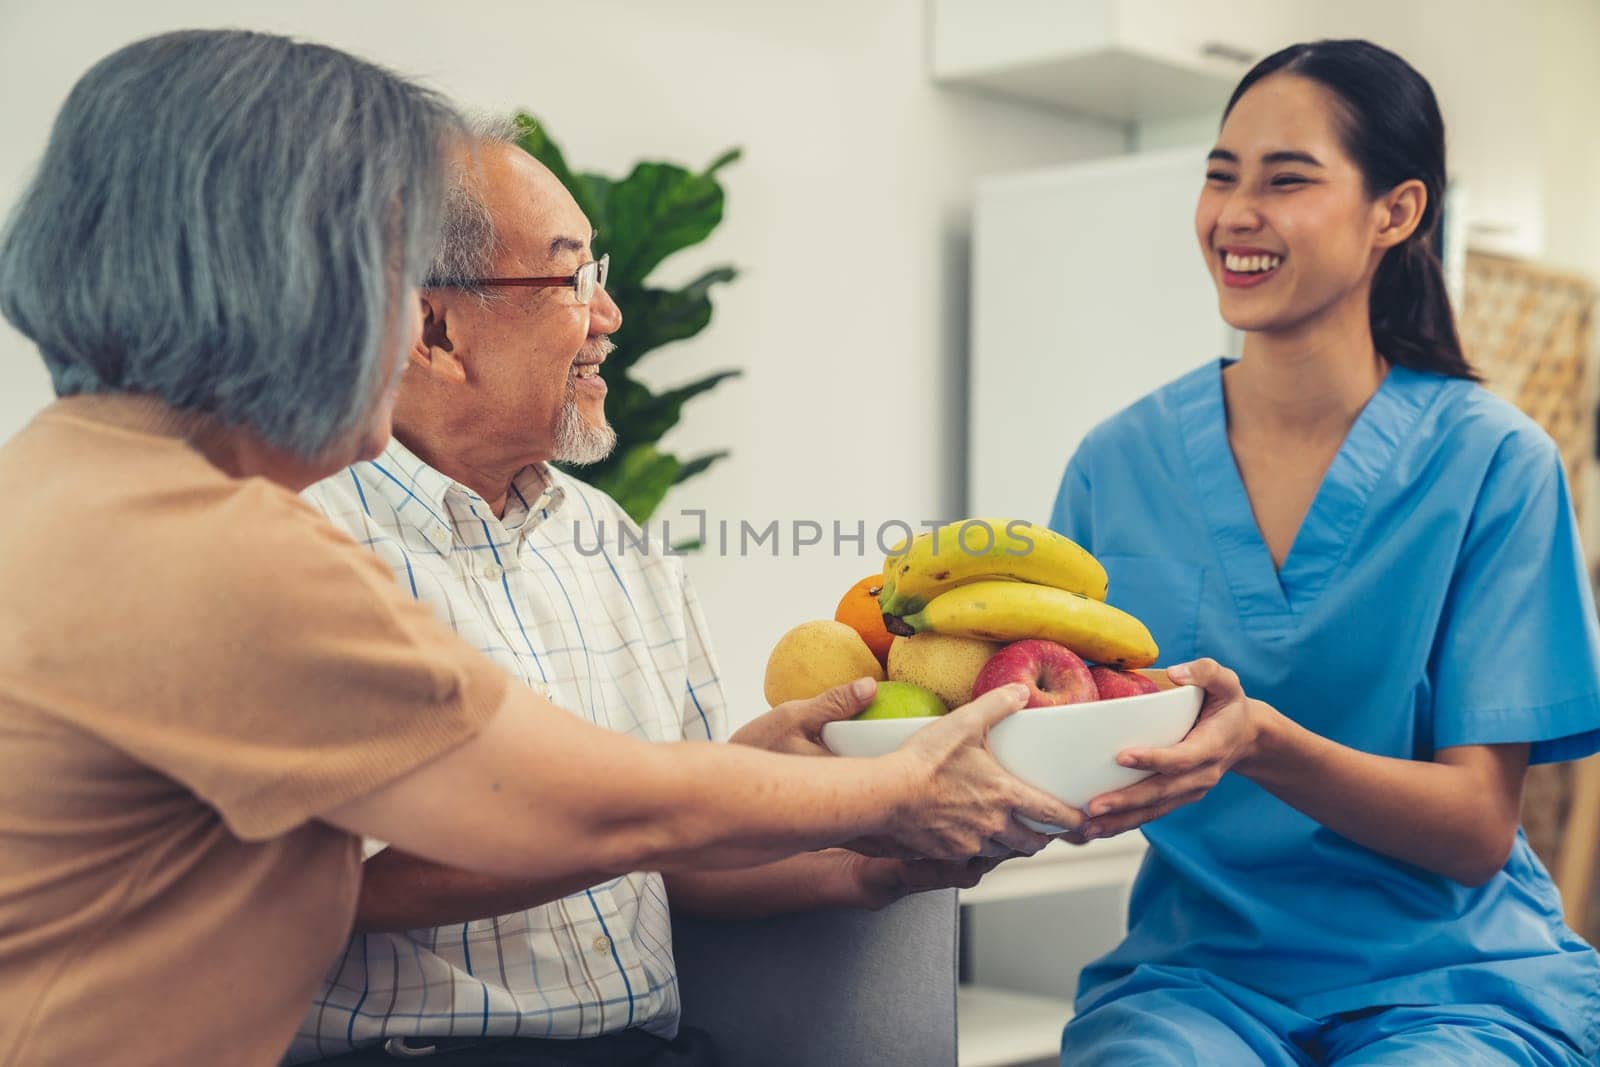 Contented senior couple taking a bowl of fruit from a nurse at home. Senior care at home.